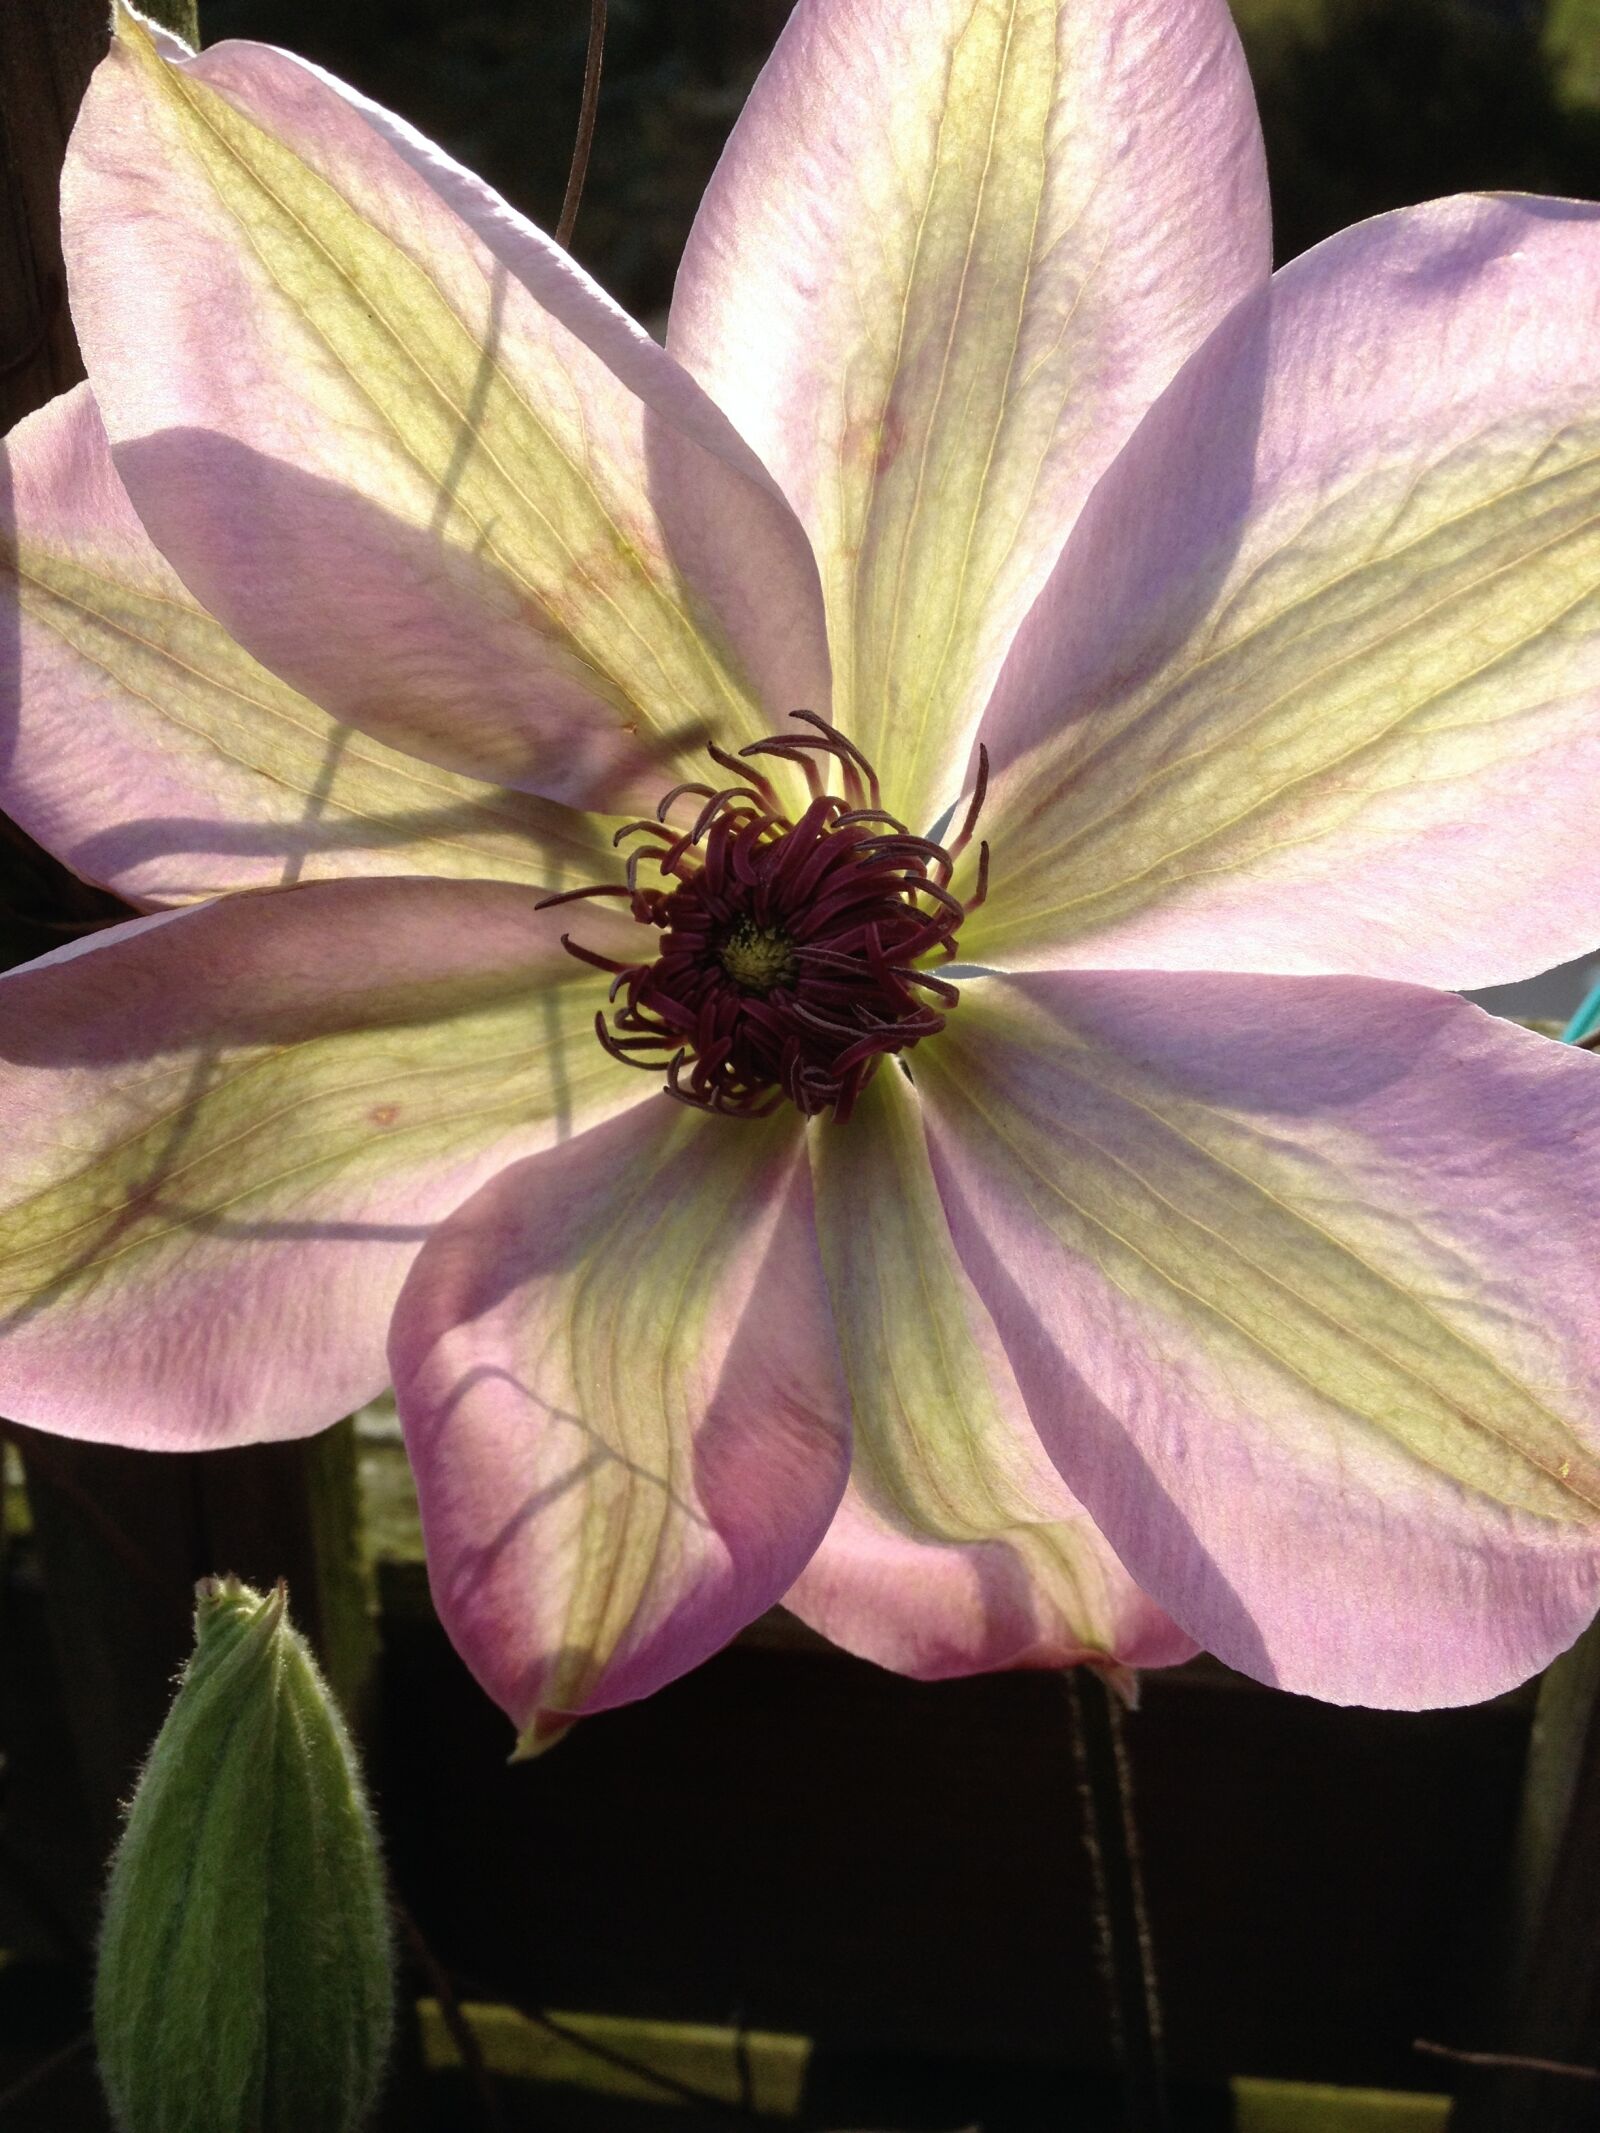 Apple iPhone 4S sample photo. Flower, clematis, nature photography